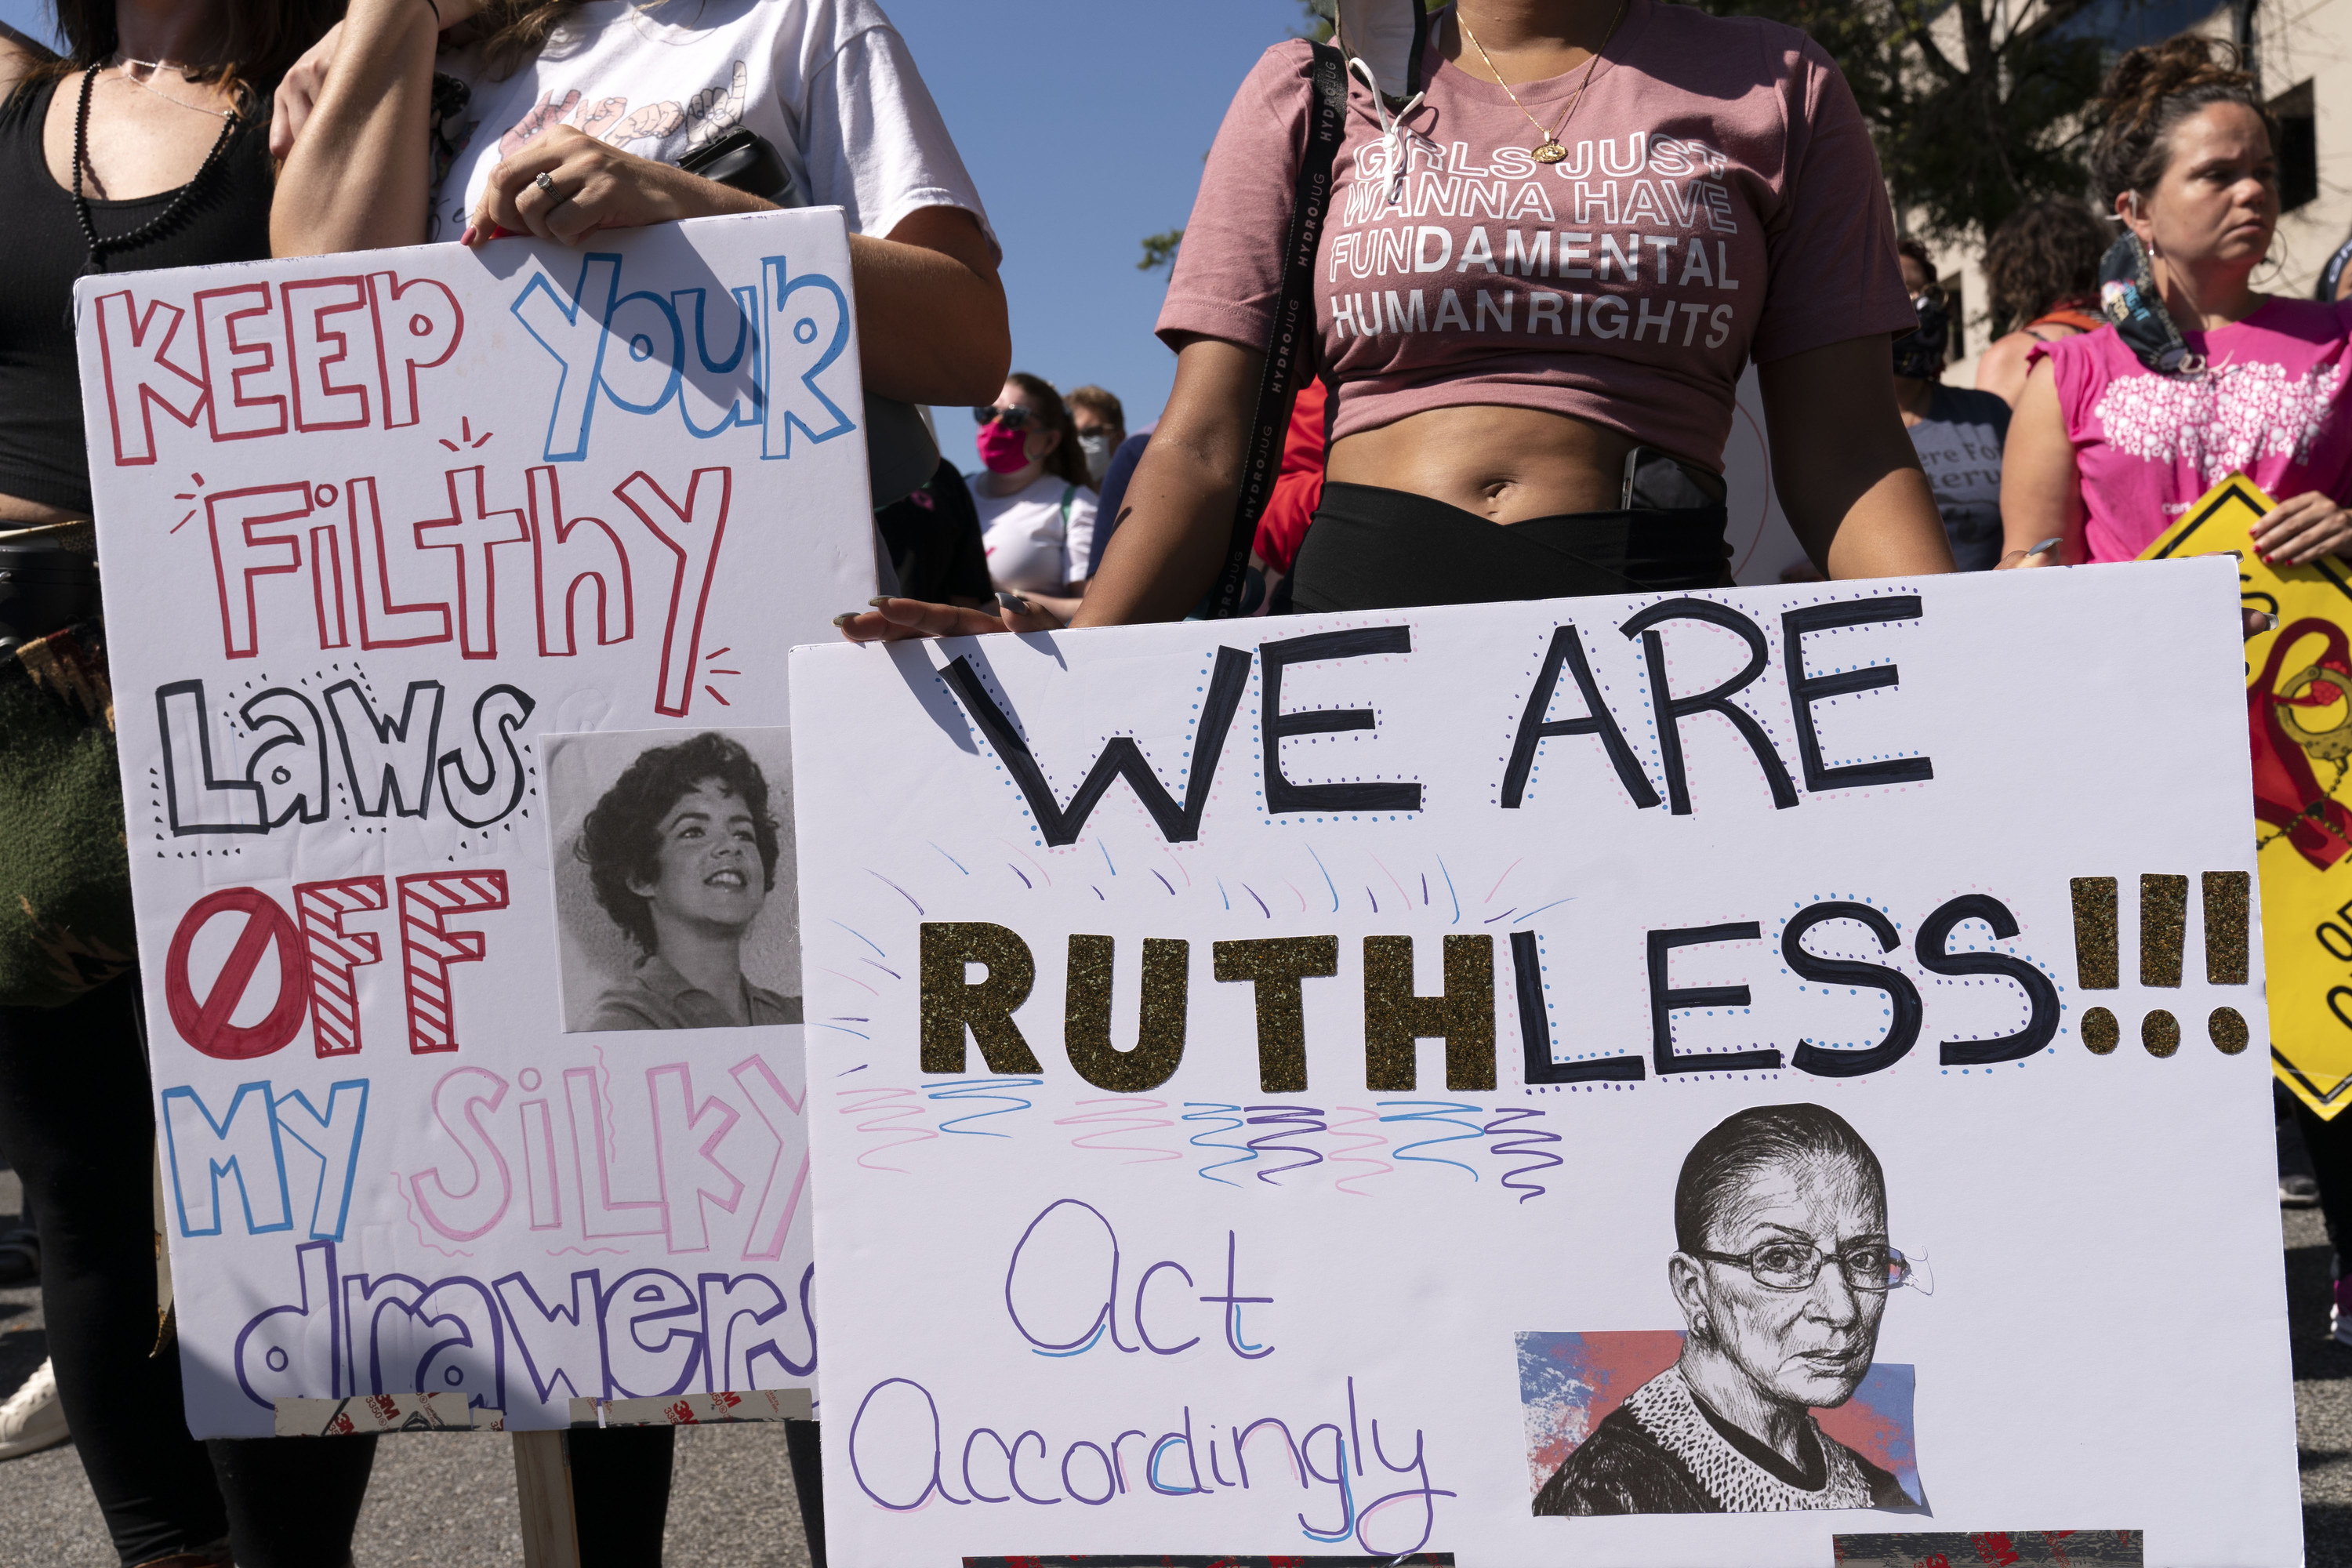 Signs held by two protesters are shown: &quot;Keep Your Filthy Laws Off My Silky Drawers,&quot; with a photo of Stockard Channing as Rizzo from &quot;Grease,&quot; and &quot;We Are RUTHless!!! Act Accordingly,&quot; with an image of the late Supreme Court Justice Ruth Bader Ginsburg